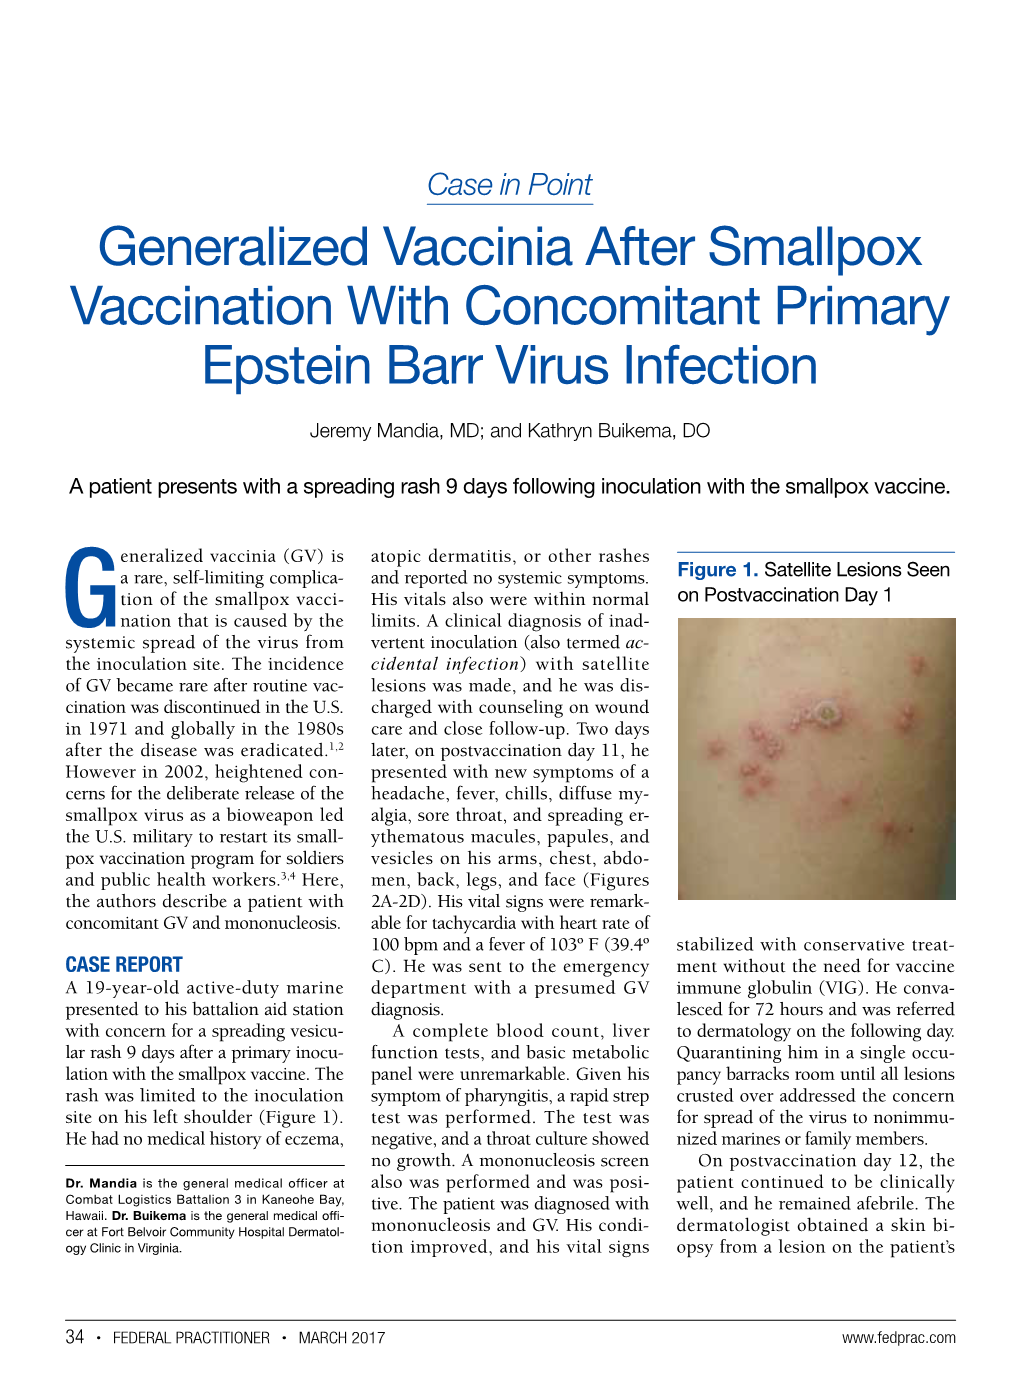 Generalized Vaccinia After Smallpox Vaccination with Concomitant Primary Epstein Barr Virus Infection